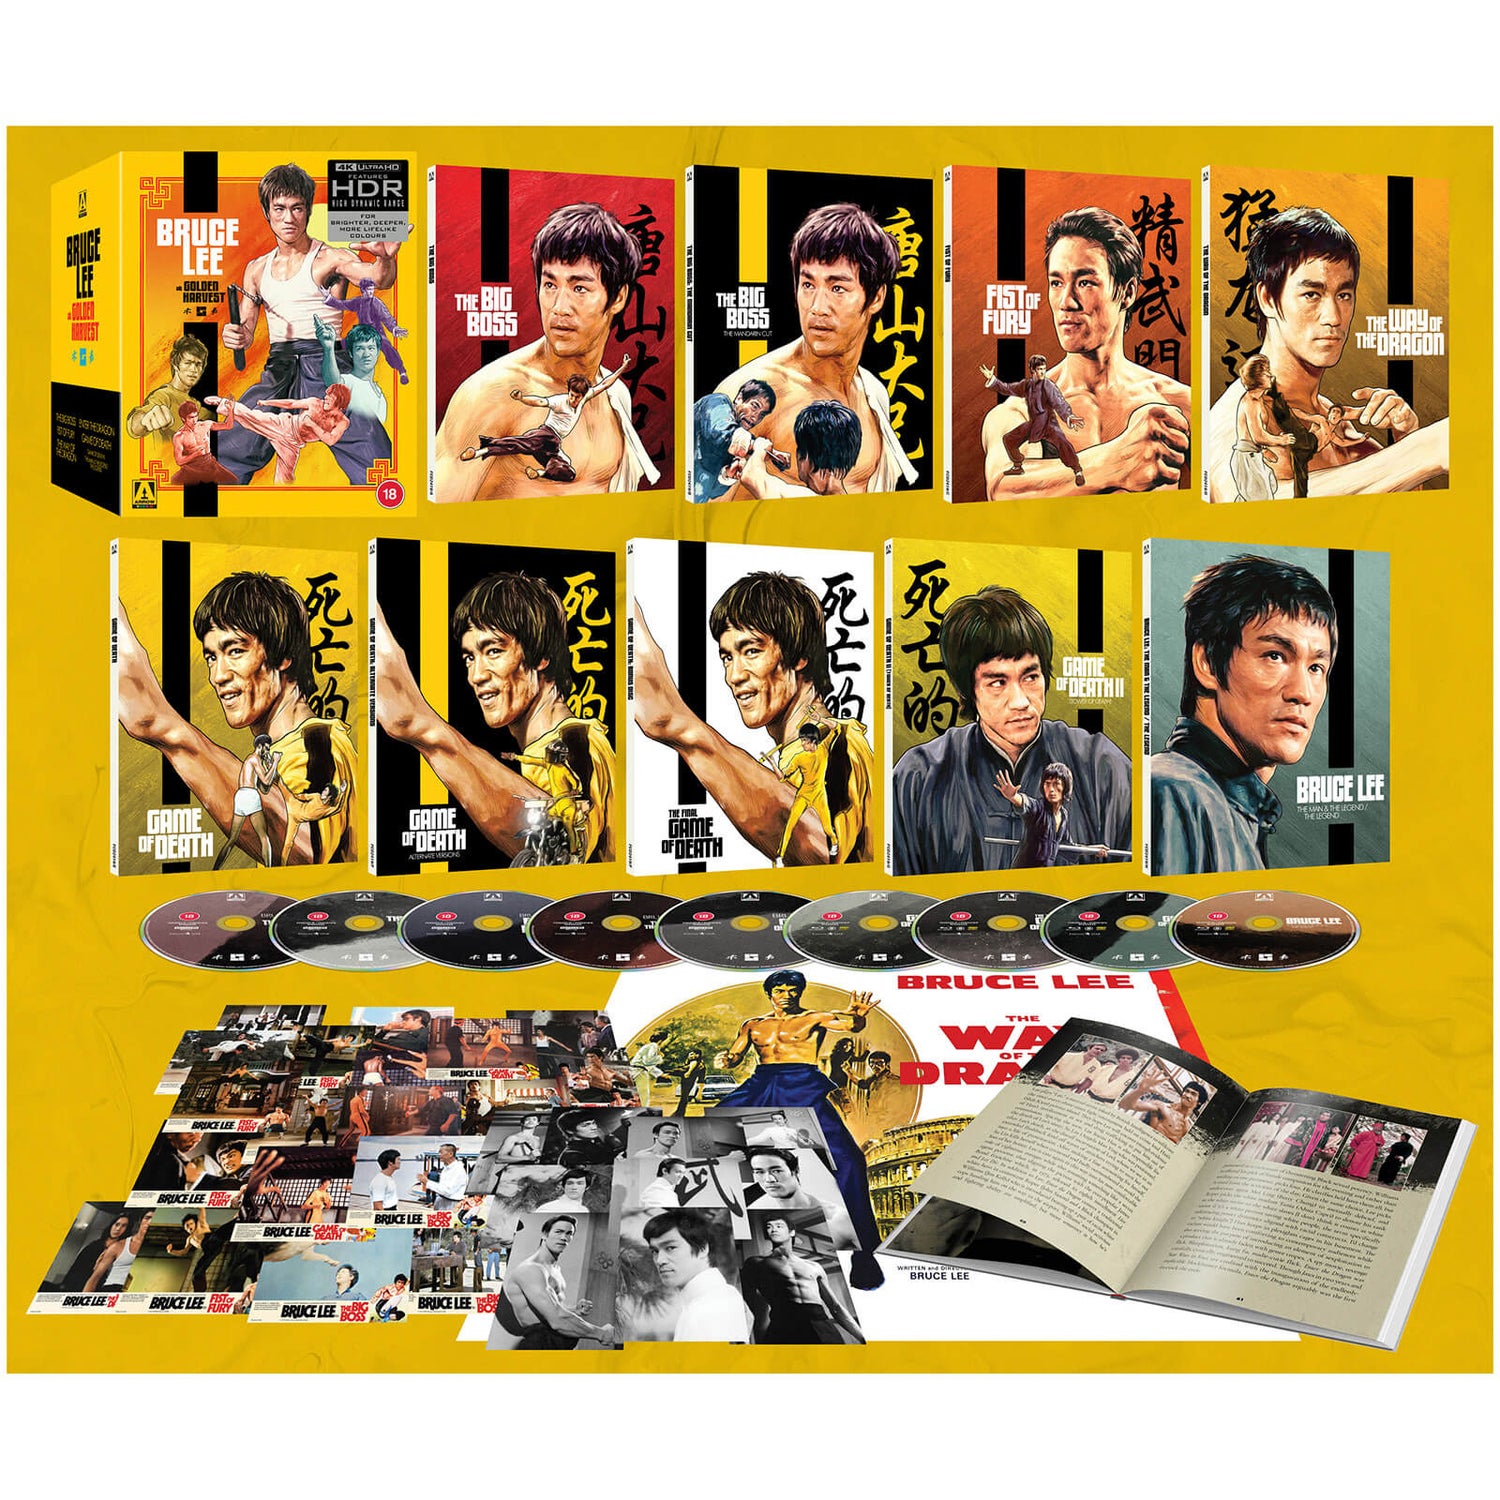 Bruce Lee at Golden Harvest - Arrow Exclusive - Limited Edition 4K Ultra HD